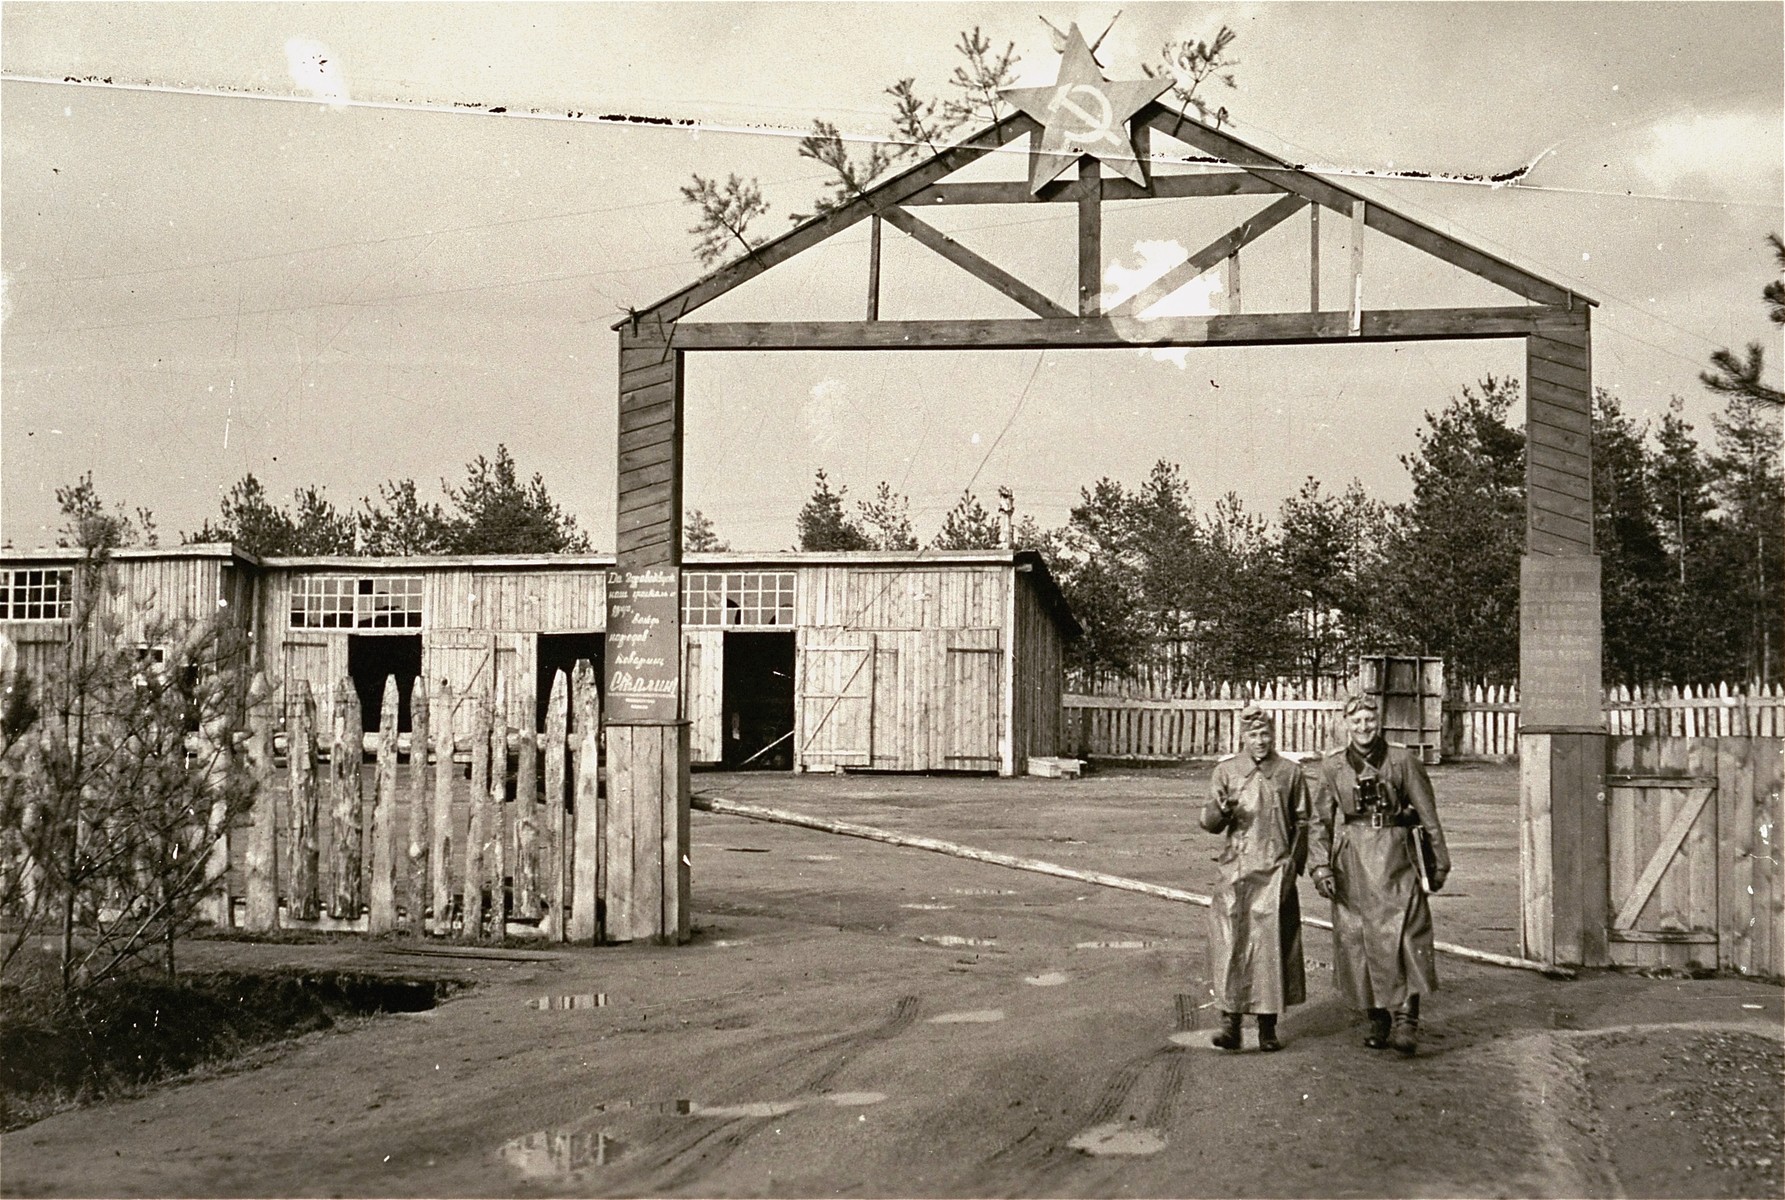 Two German soldiers stand outside of the gate of an abandoned Soviet camp.